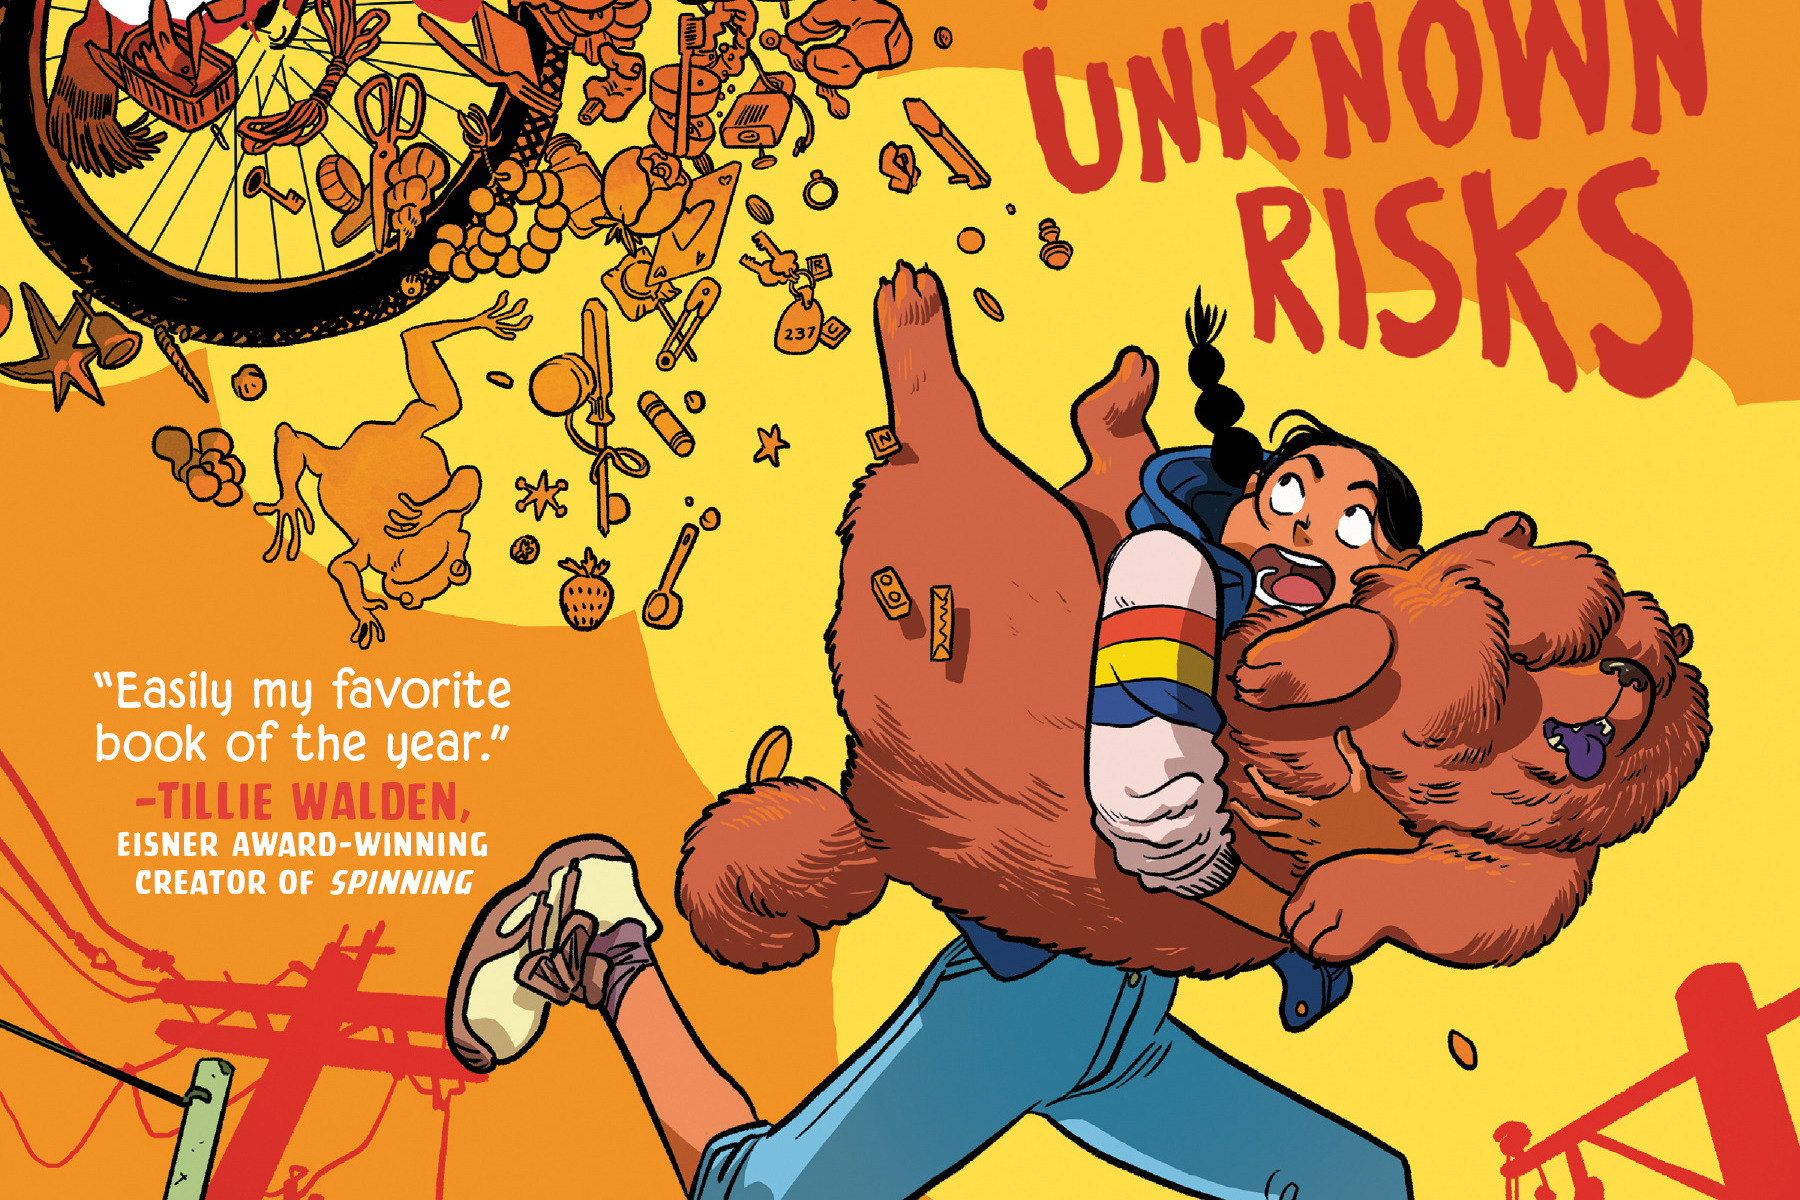 Marguerite, a tan girl with braided pigtails, dashes away from an avalanche of miscellaneous objects, carrying her large fluffy dog, Daisy, on the cover of Danger and other Unknown Risks.